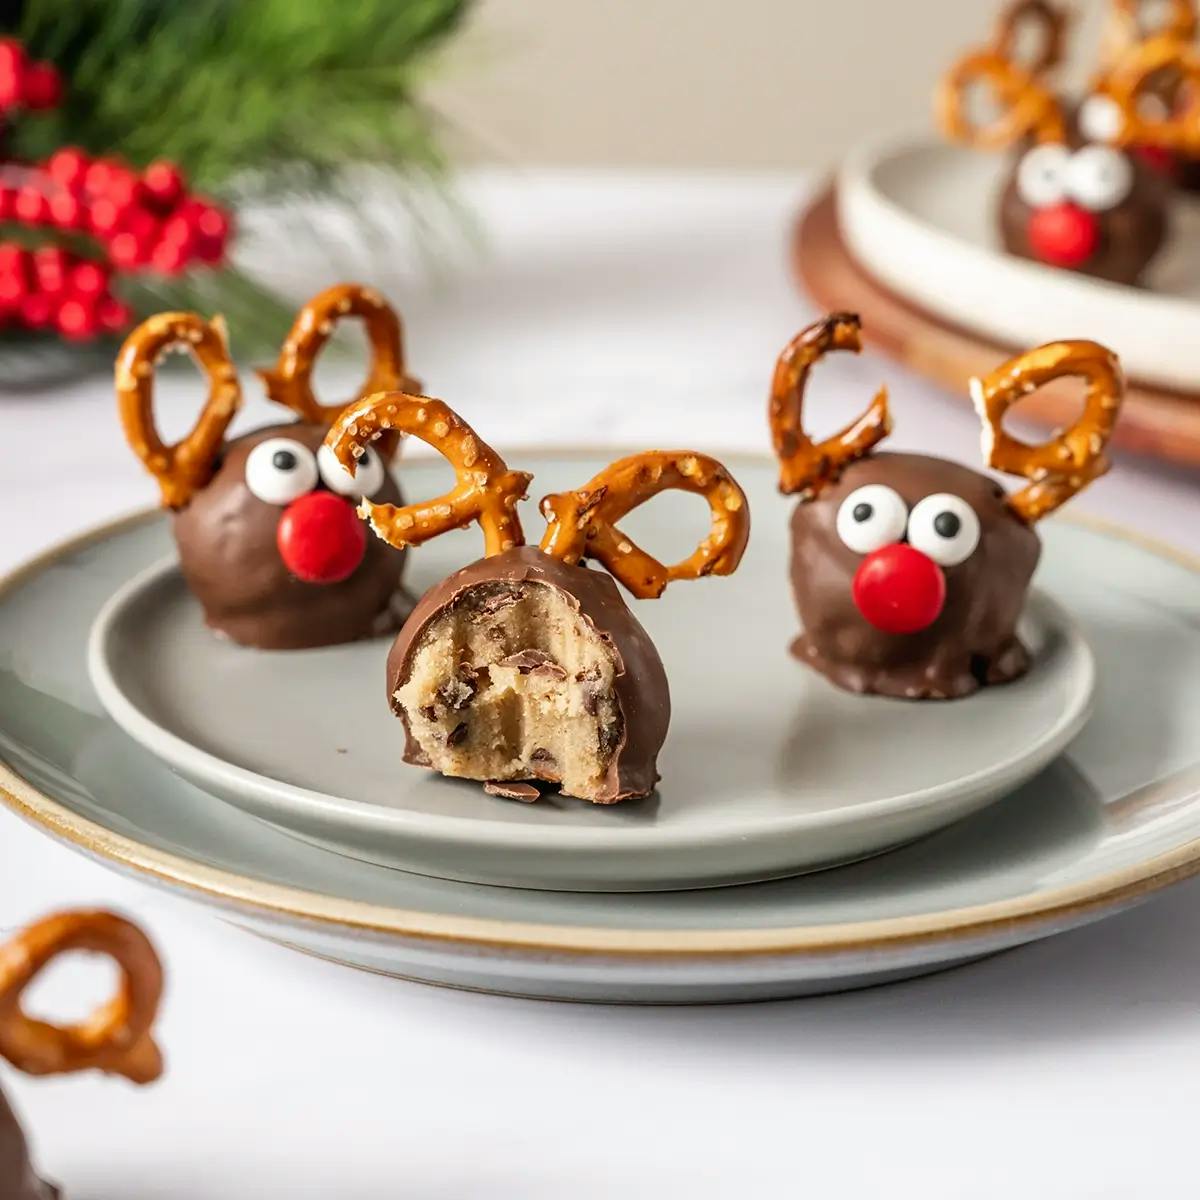 Reindeer Cookie Dough Balls covered in chocolate with pretzel pieces for antlers and mini M&Ms as eyes and nose.